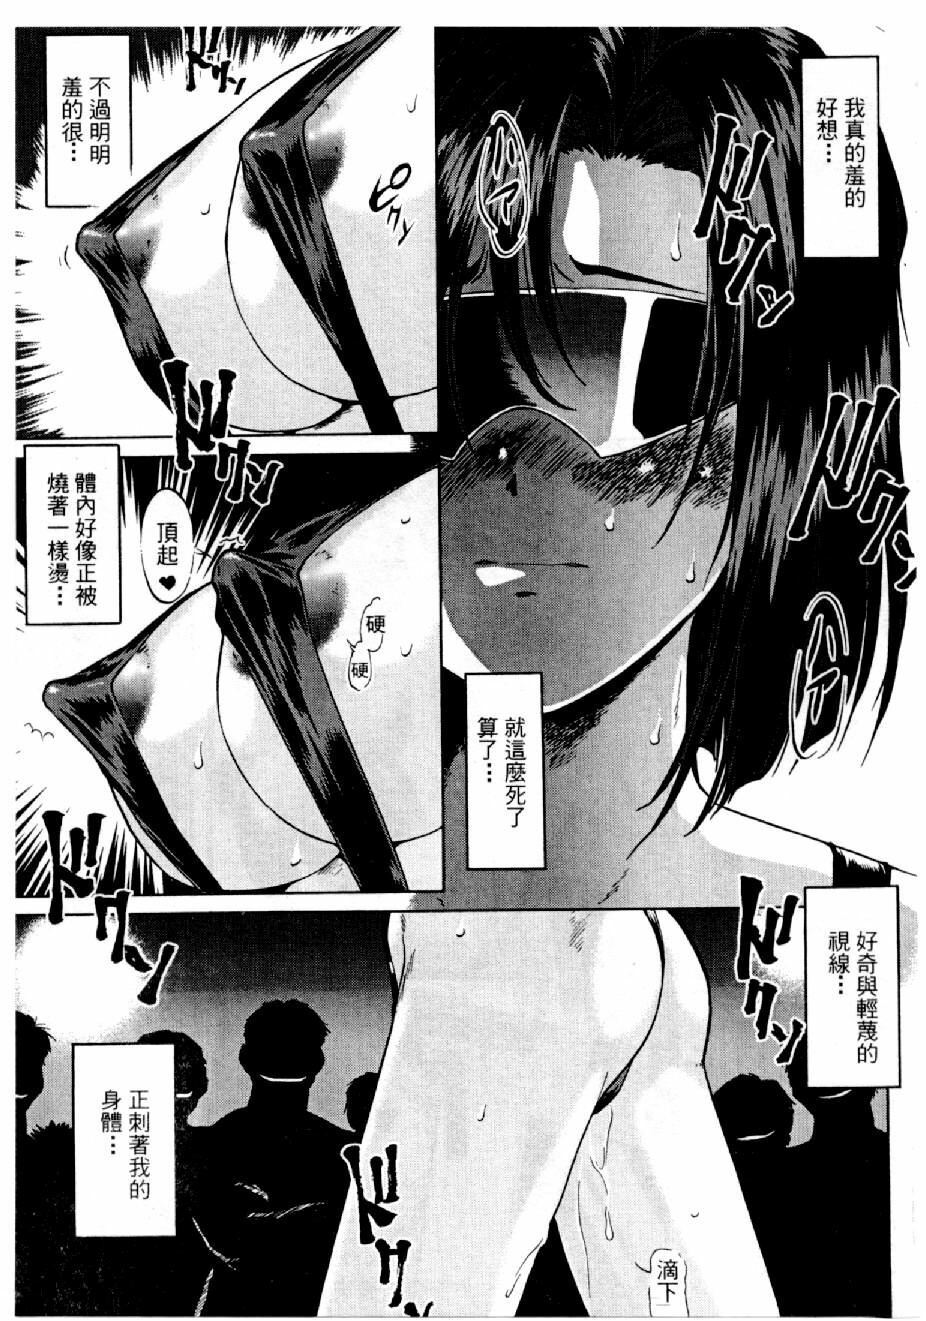 [Mizuno Kei] Cutie Police Woman 2 (You're Under Arrest) [Chinese] page 12 full